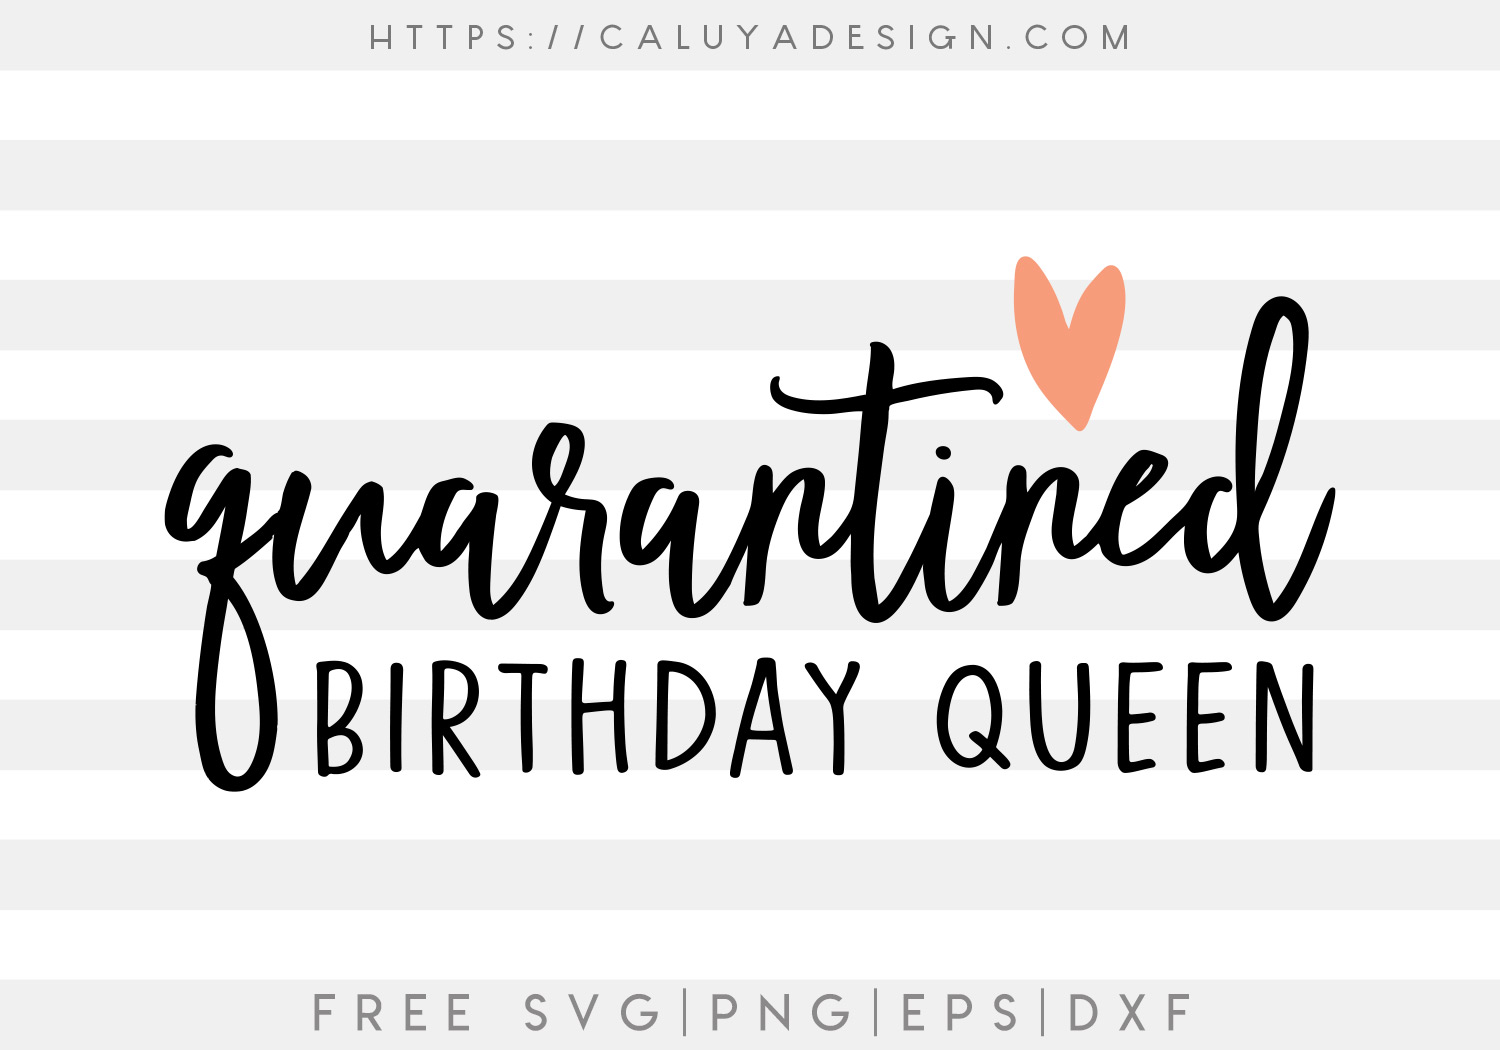 Quarantined Birthday Queen SVG, PNG, EPS & DXF